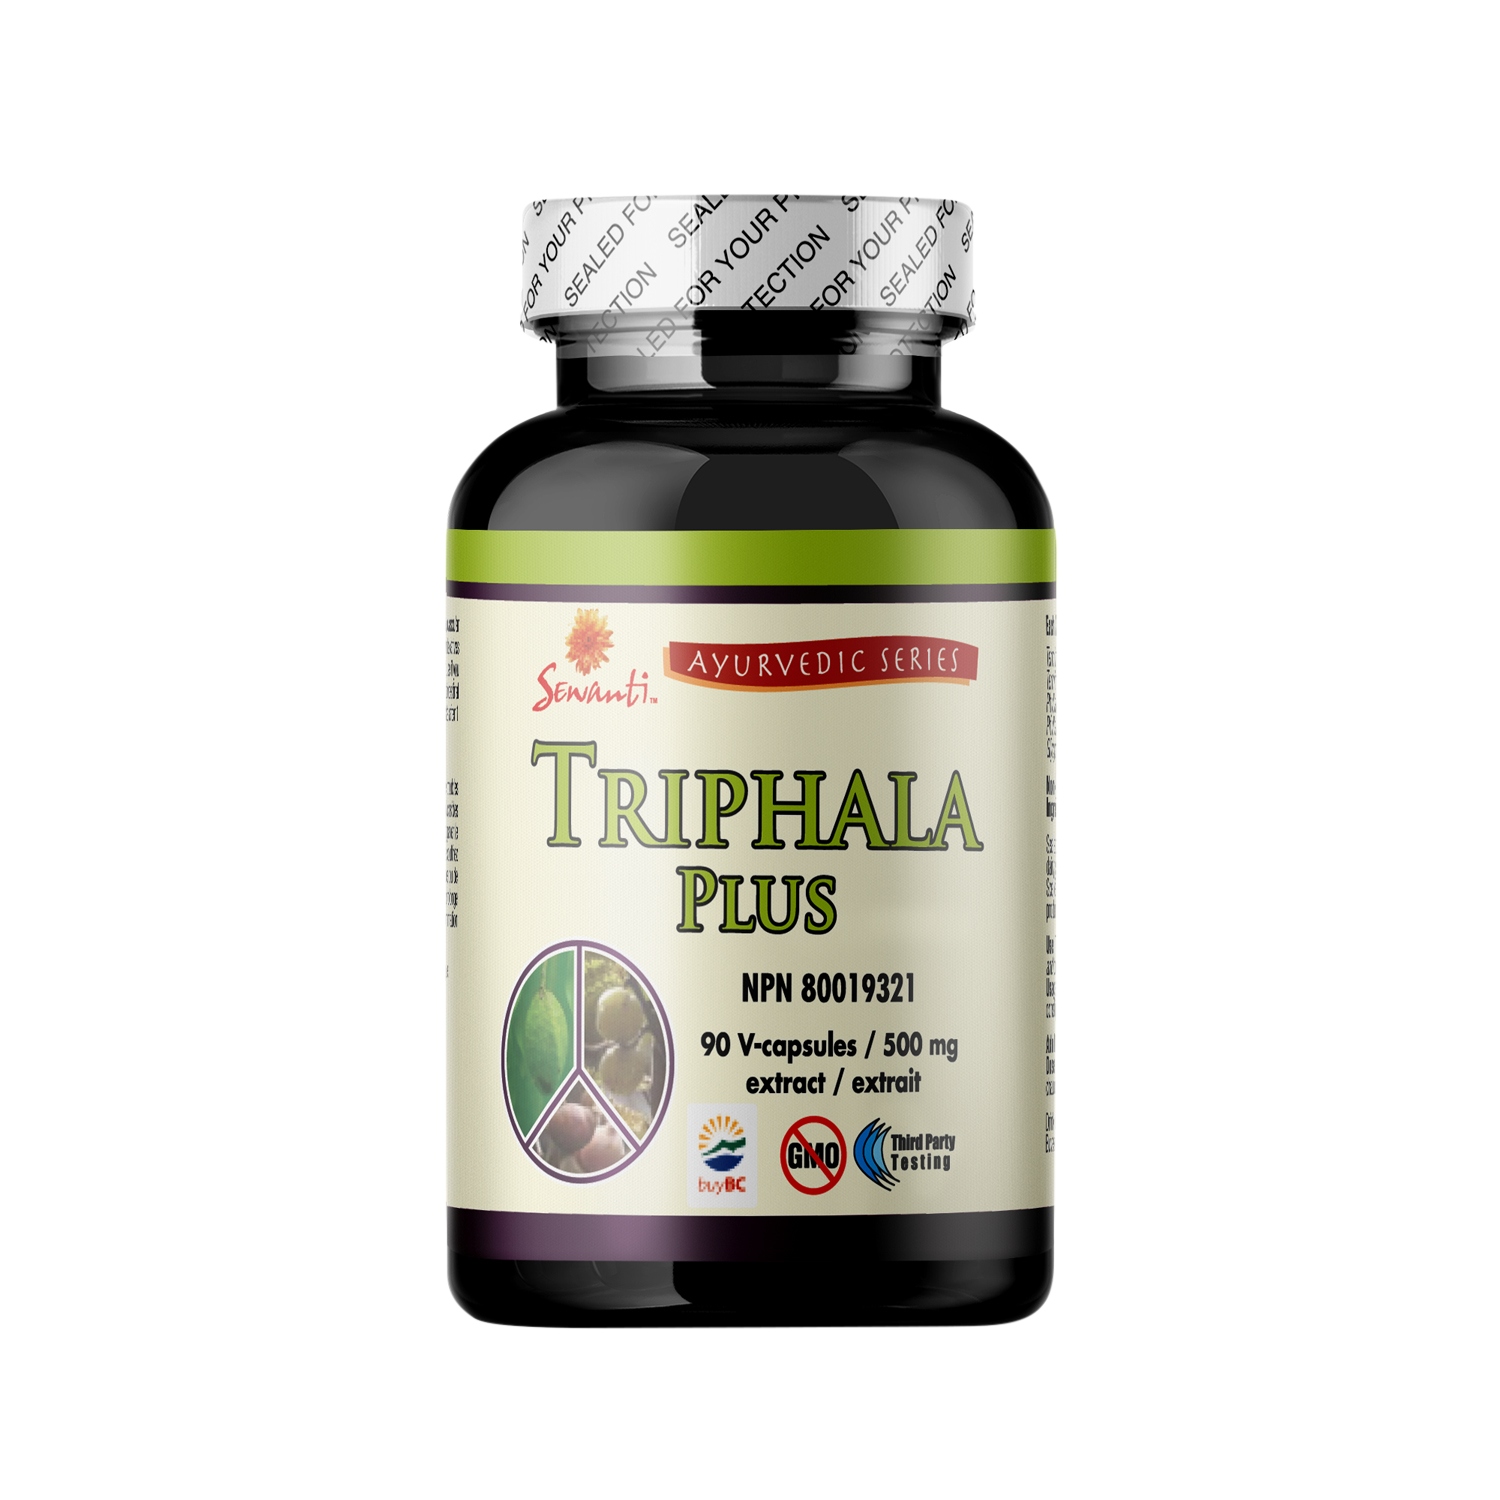 Ayurvedic Triphala Plus Capsules - Triphala herbal formula literary means 3 fruits but Sewanti Triphala plus formulation has 2 added ingredients. Traditionally used in Ayurvedic medicine in the treatment of indigestion, constipation, and strengthening the eyes.